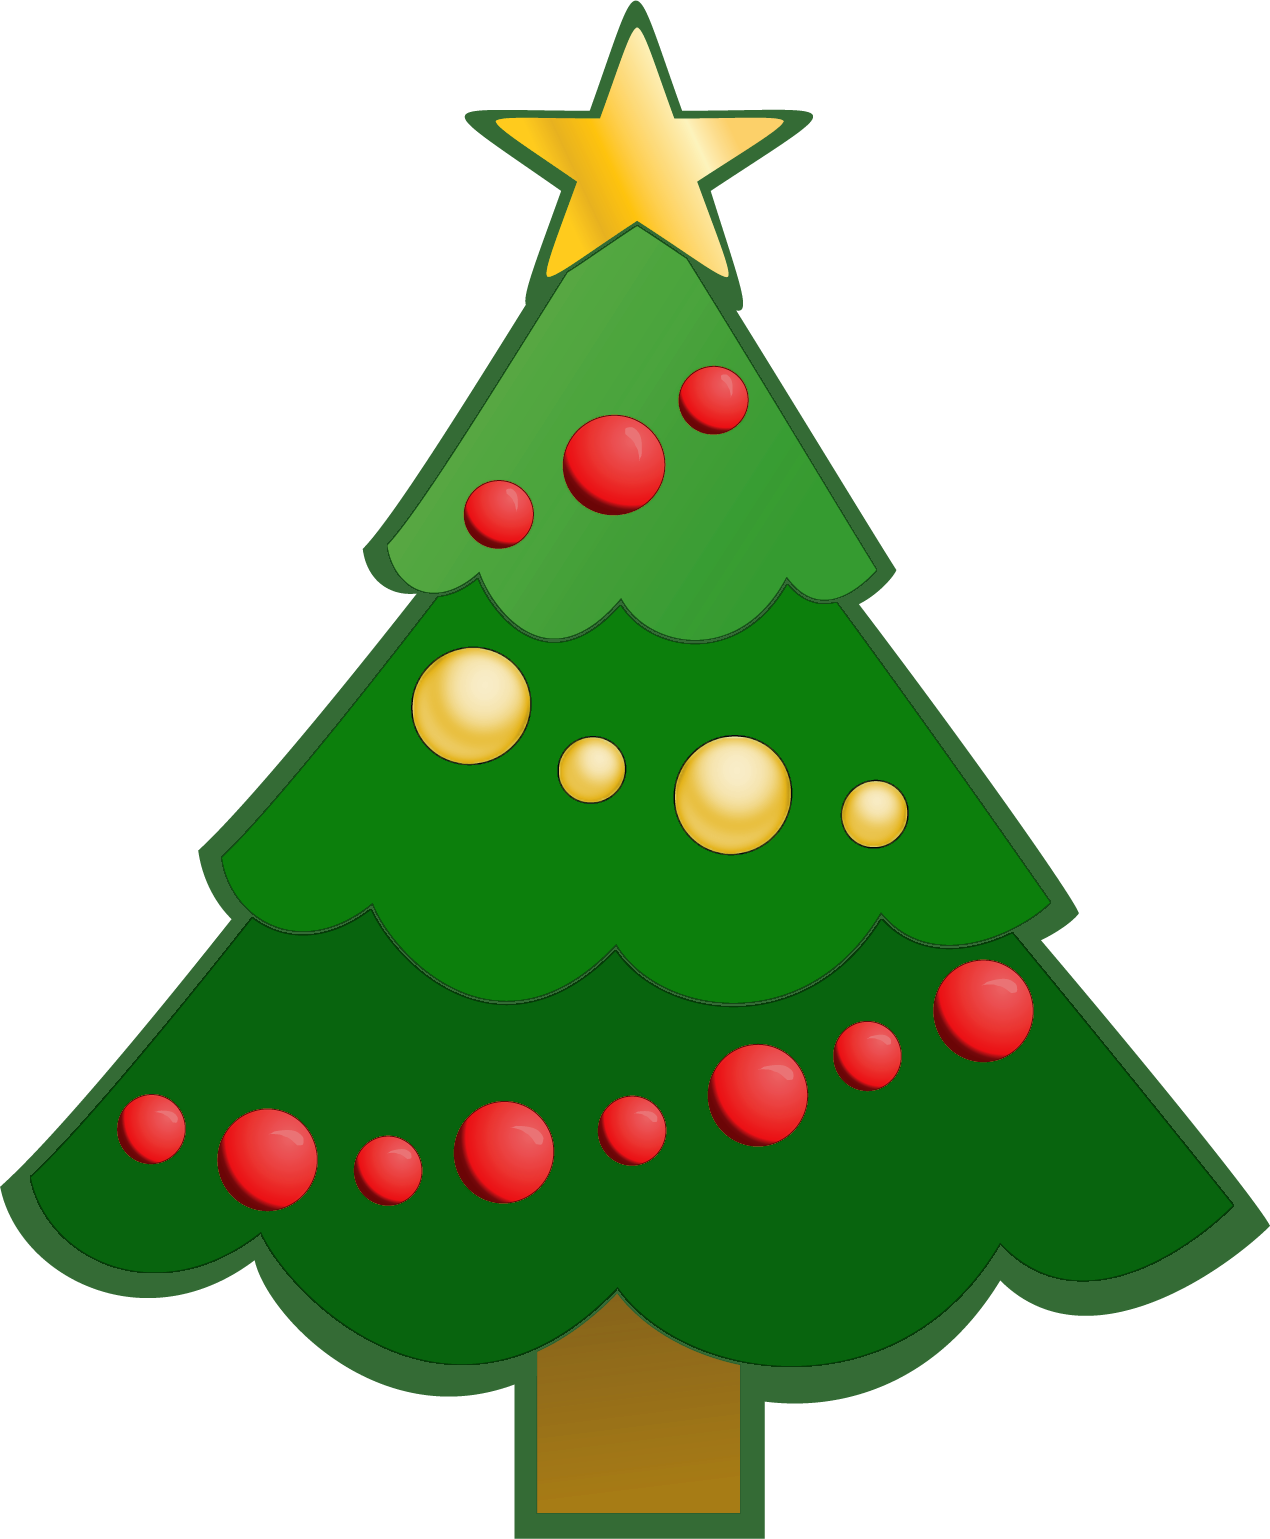 Xmas Stuff For > Christmas Tree With Presents Clip Art